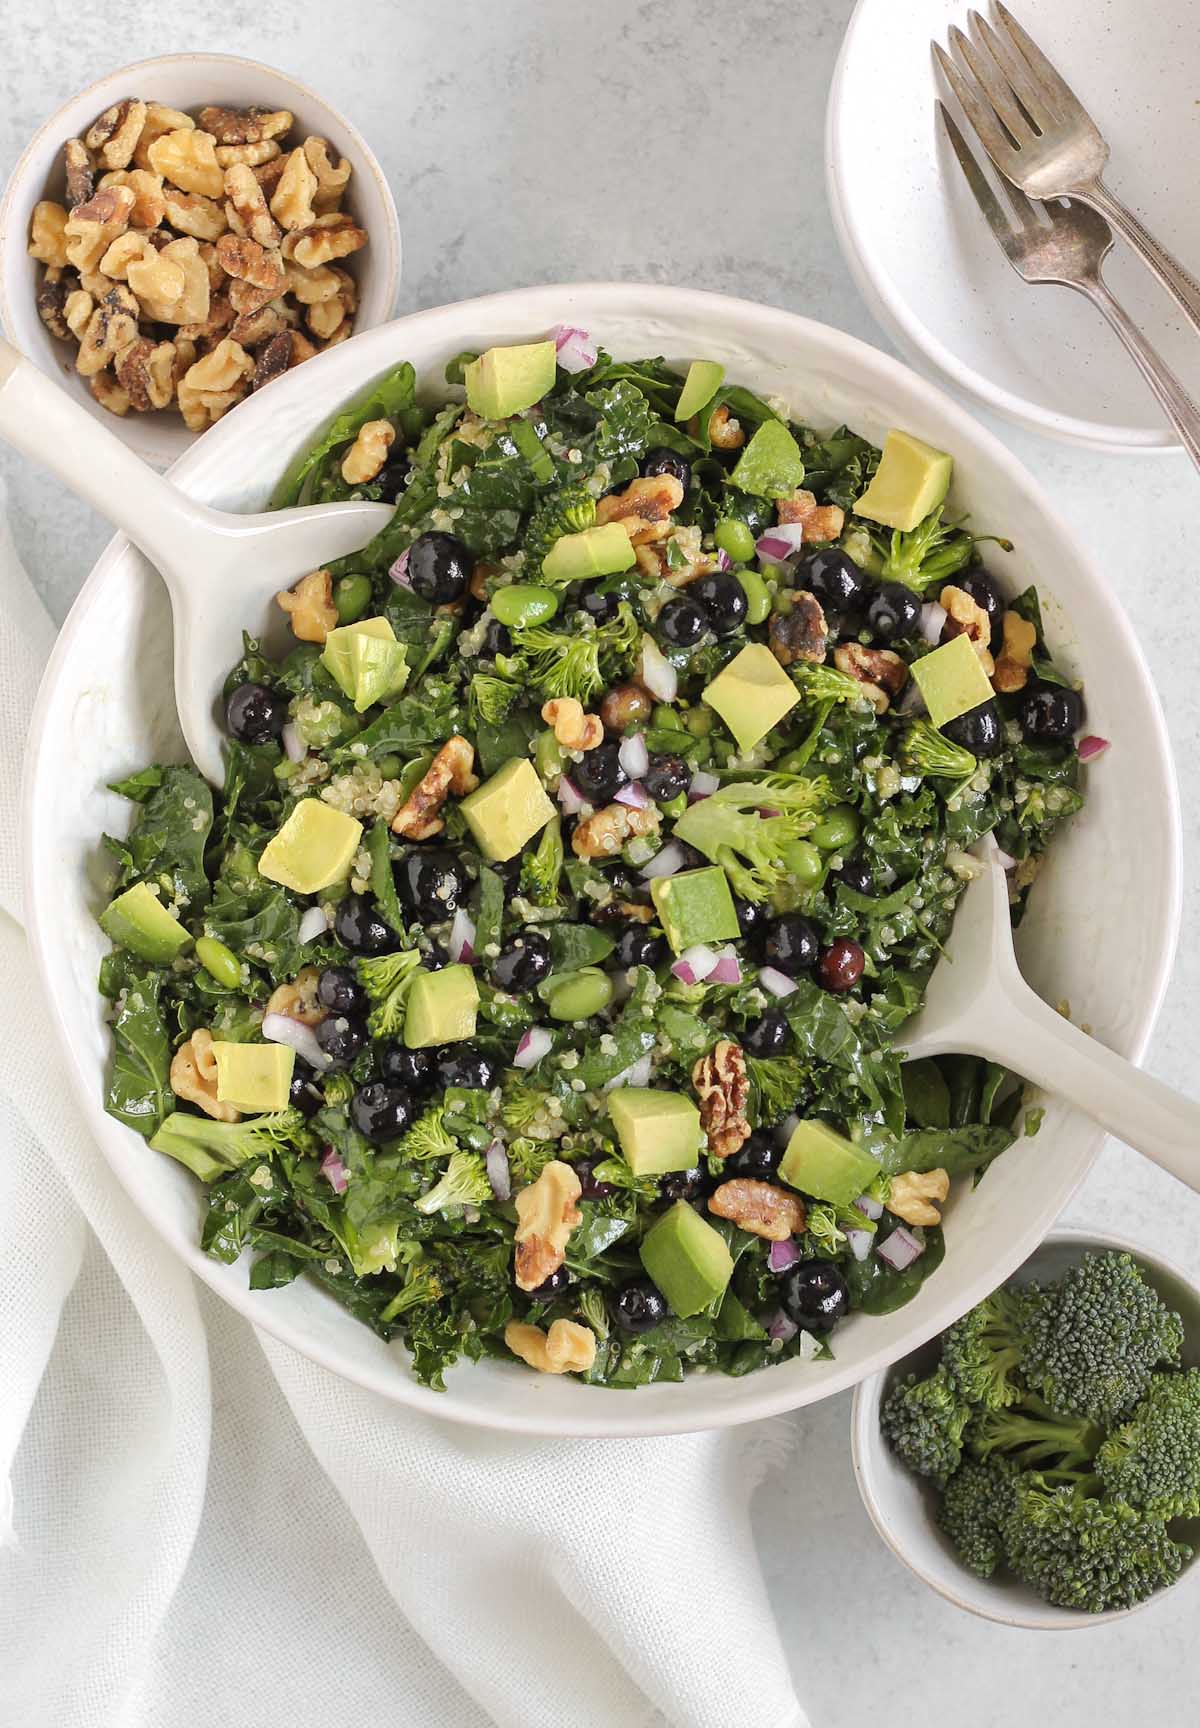 Superfood salad with blueberries, broccoli, walnuts, and avocado in a white serving bowl with white salad utensils with bowls of broccoli and walnuts off to the side.